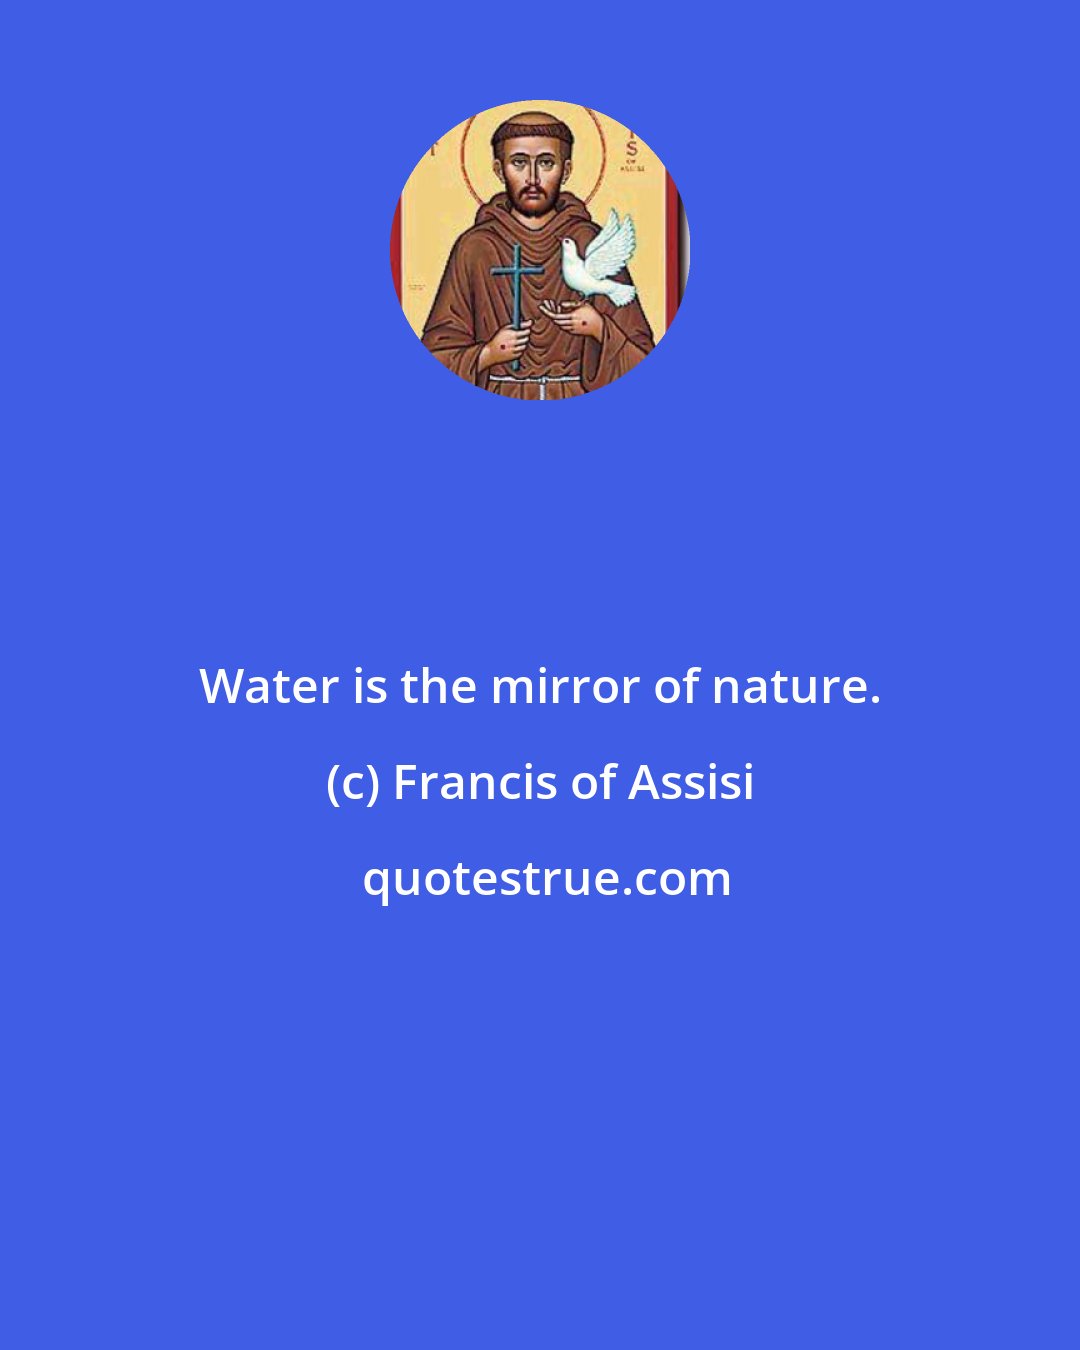 Francis of Assisi: Water is the mirror of nature.